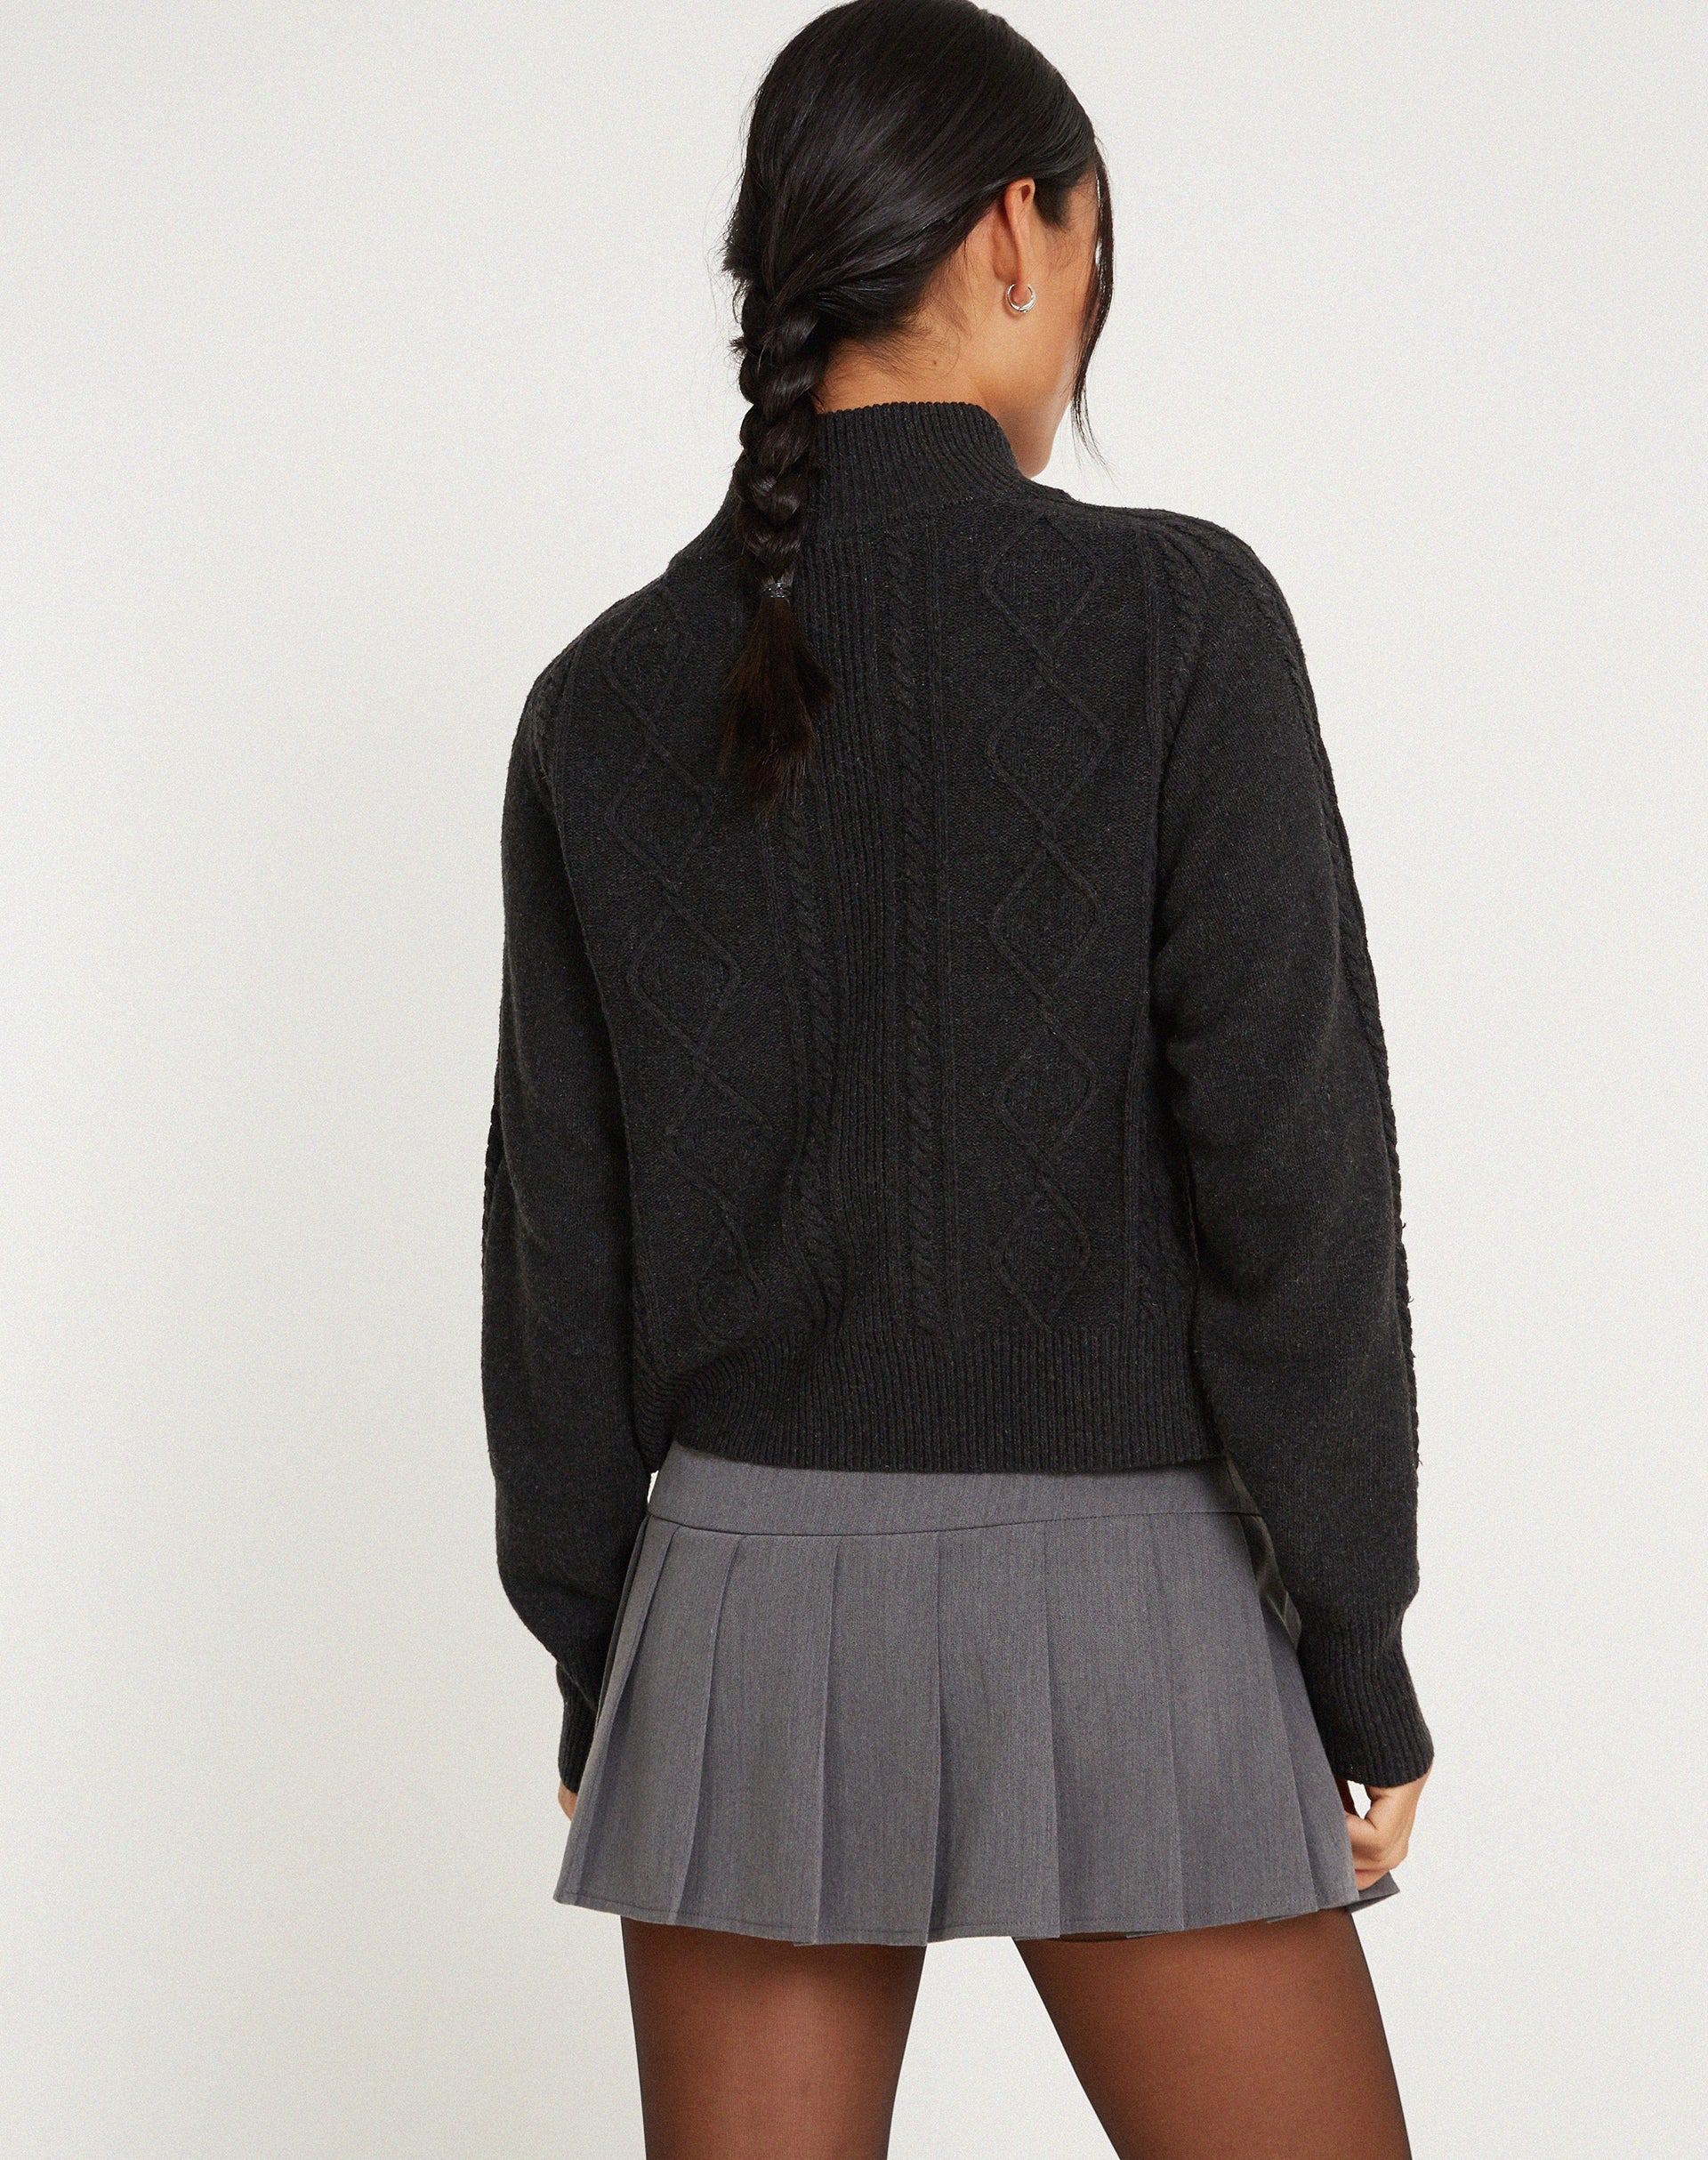 image of Lemila Cable Knit Jacket in Dark Shadow